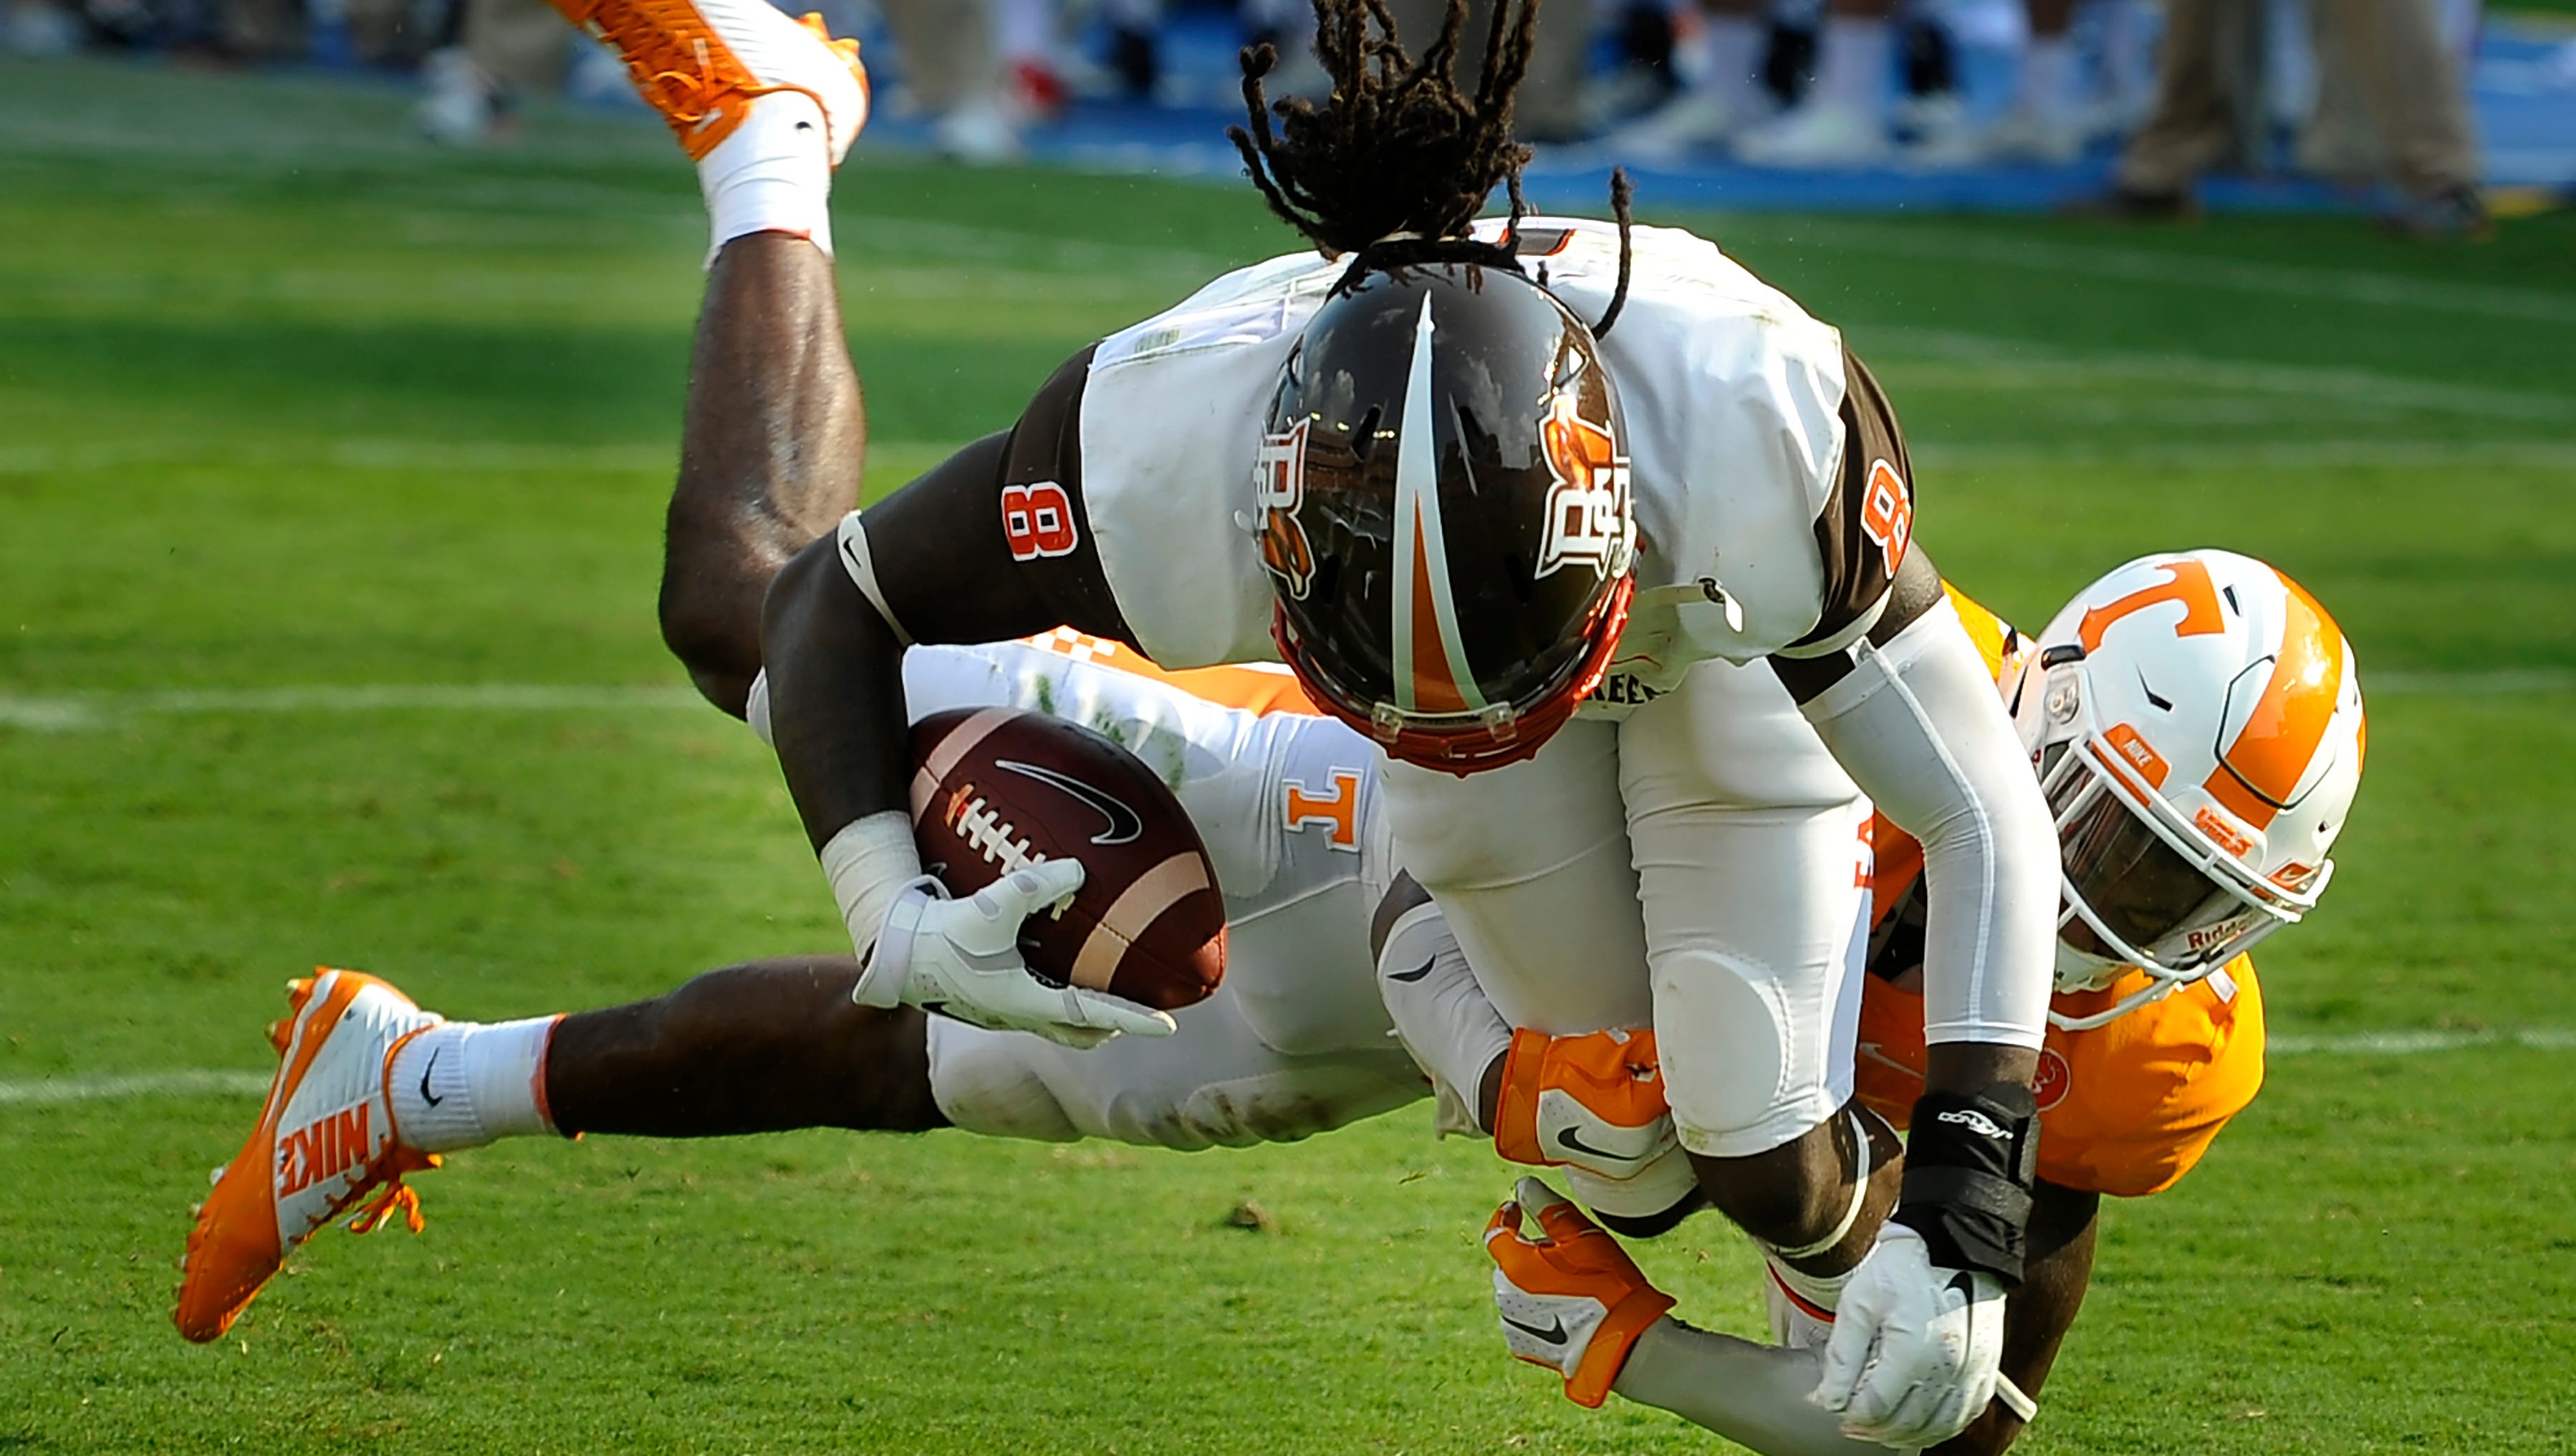 Vols Defense Has Long Way To Go Short Time To Get There